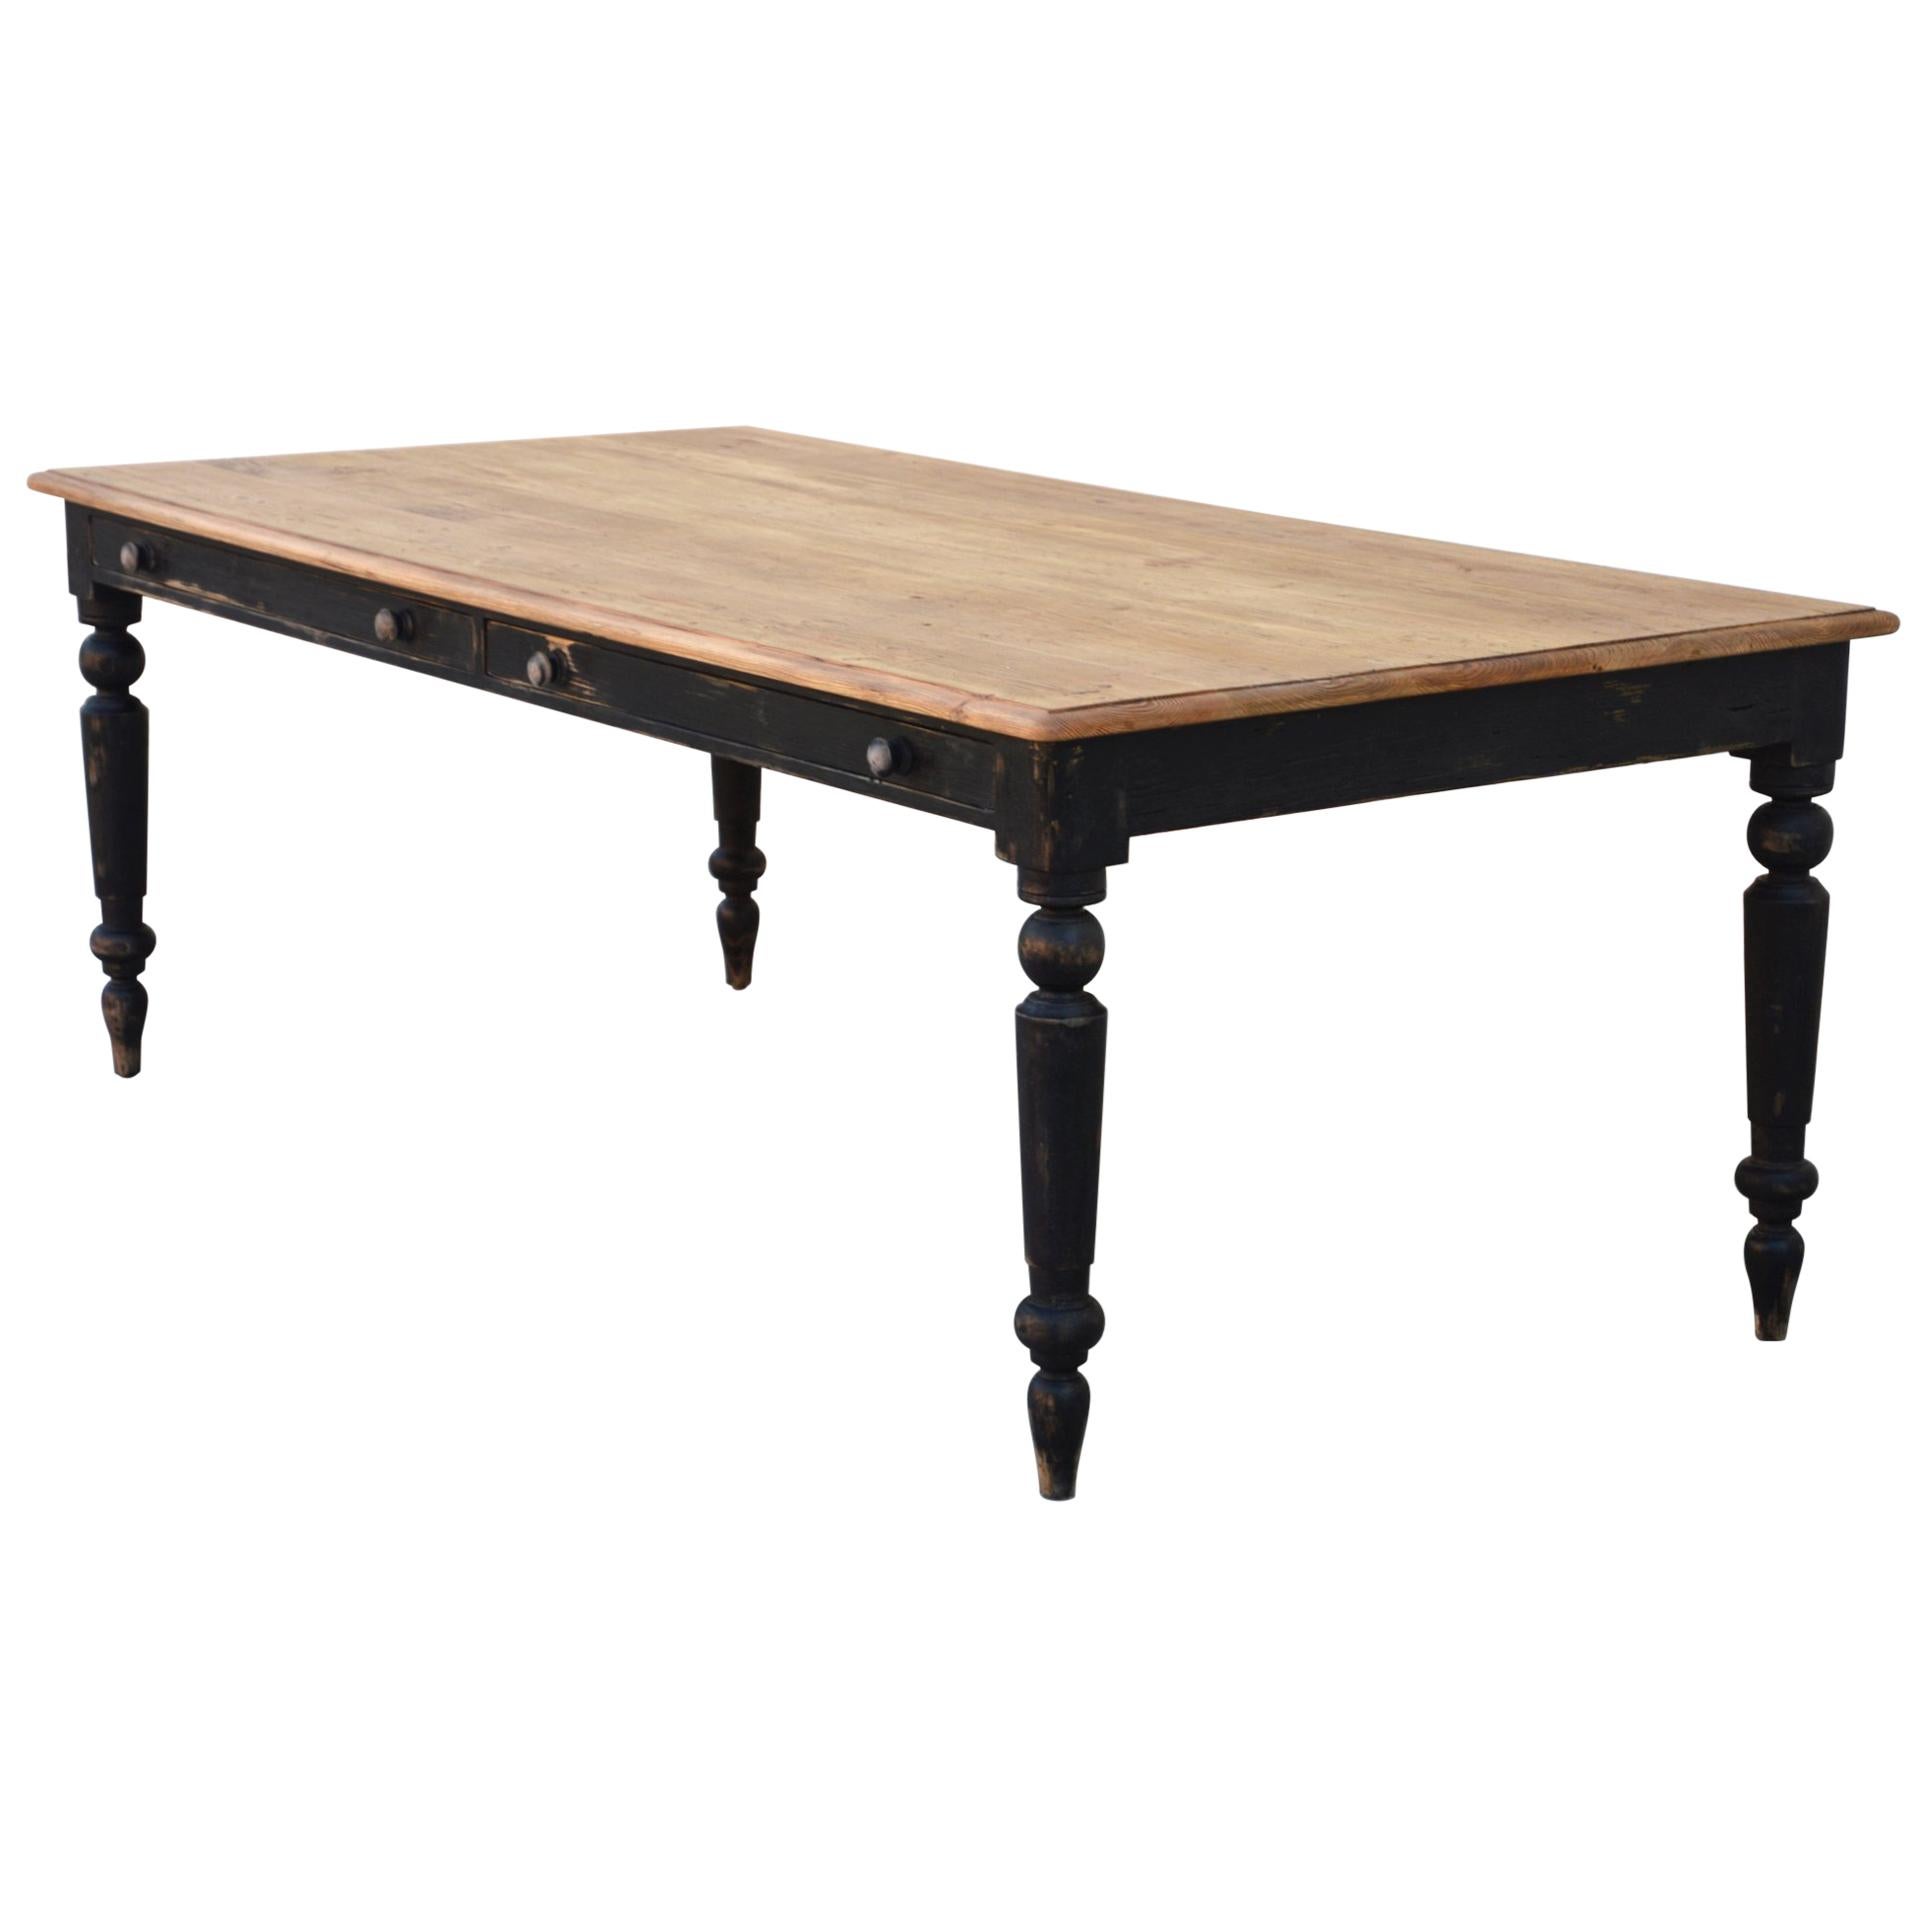 Rustic Farmhouse Table Made from Reclaimed Pine For Sale